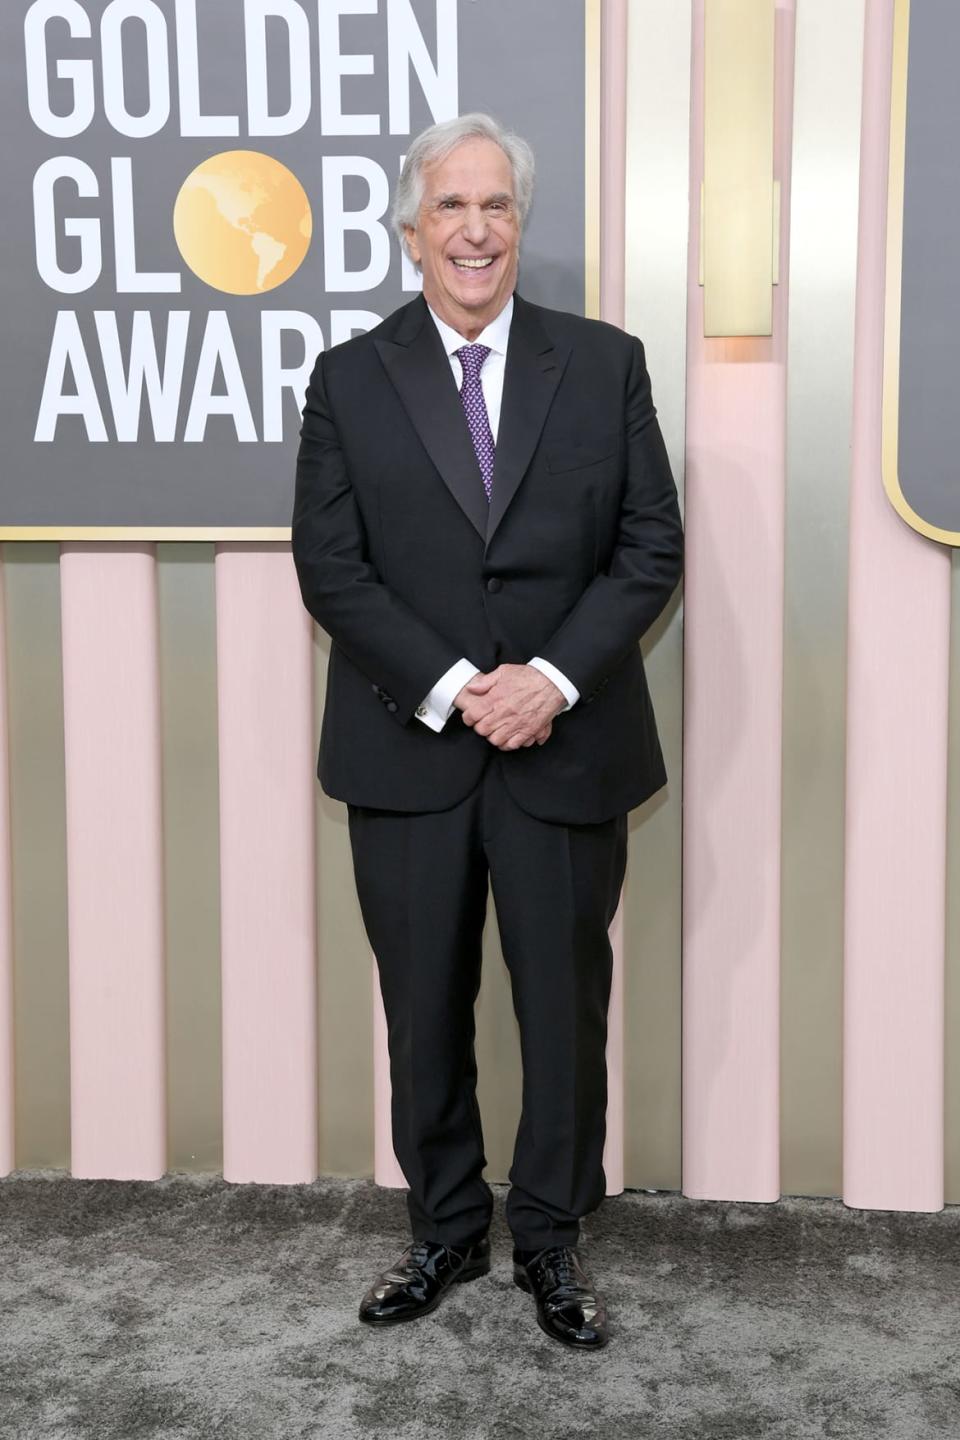 <div class="inline-image__caption"><p>Henry Winkler attends the 80th Annual Golden Globe Awards at The Beverly Hilton on January 10, 2023 in Beverly Hills, California.</p></div> <div class="inline-image__credit">Jon Kopaloff/Getty Images</div>